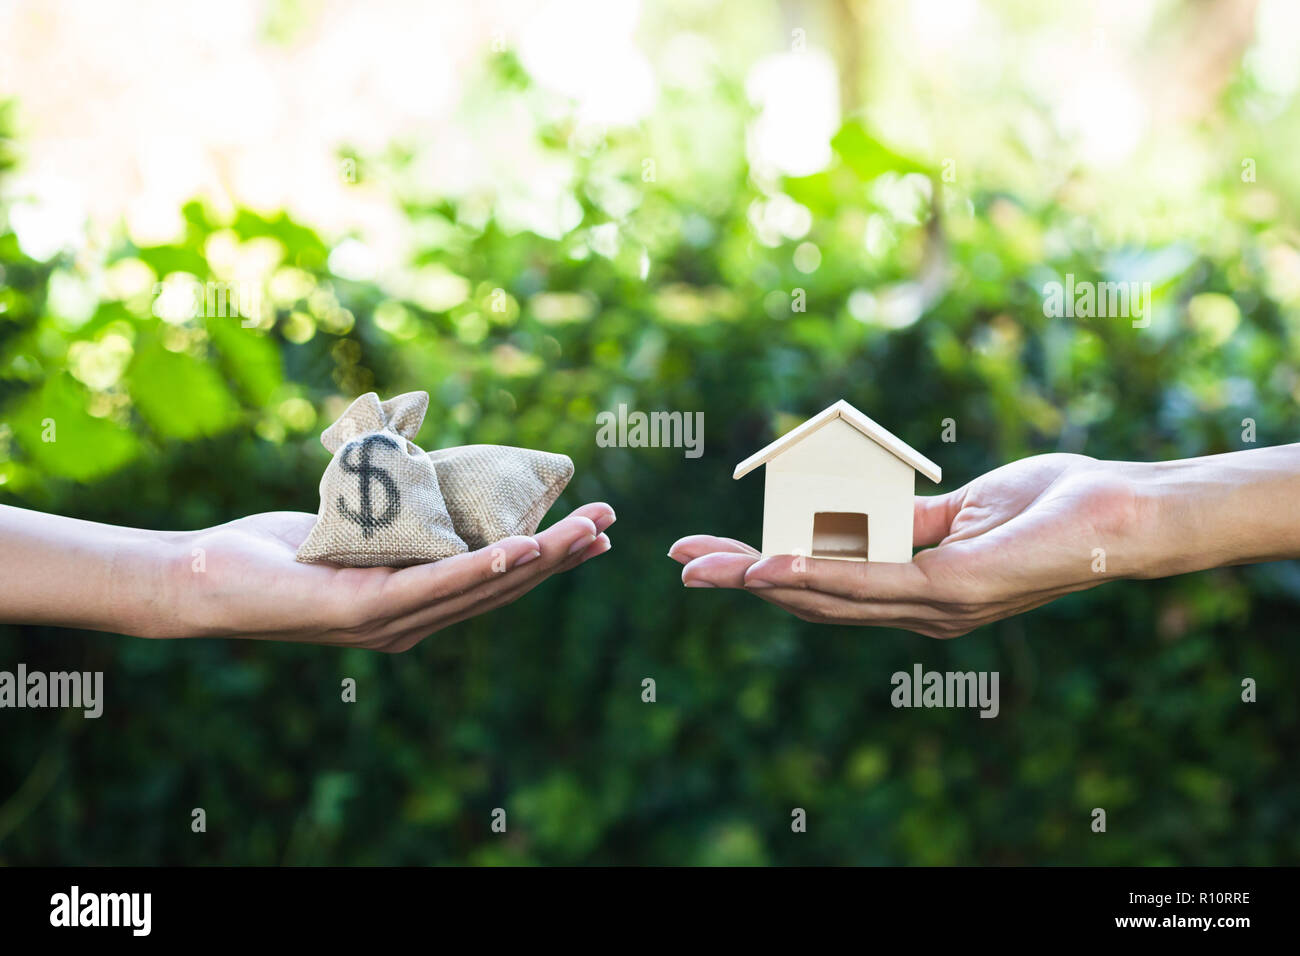 Home loan, lending, mortgage, transforming assets into cash concept : Hand holding home model change to money with green nature as background. Concept Stock Photo